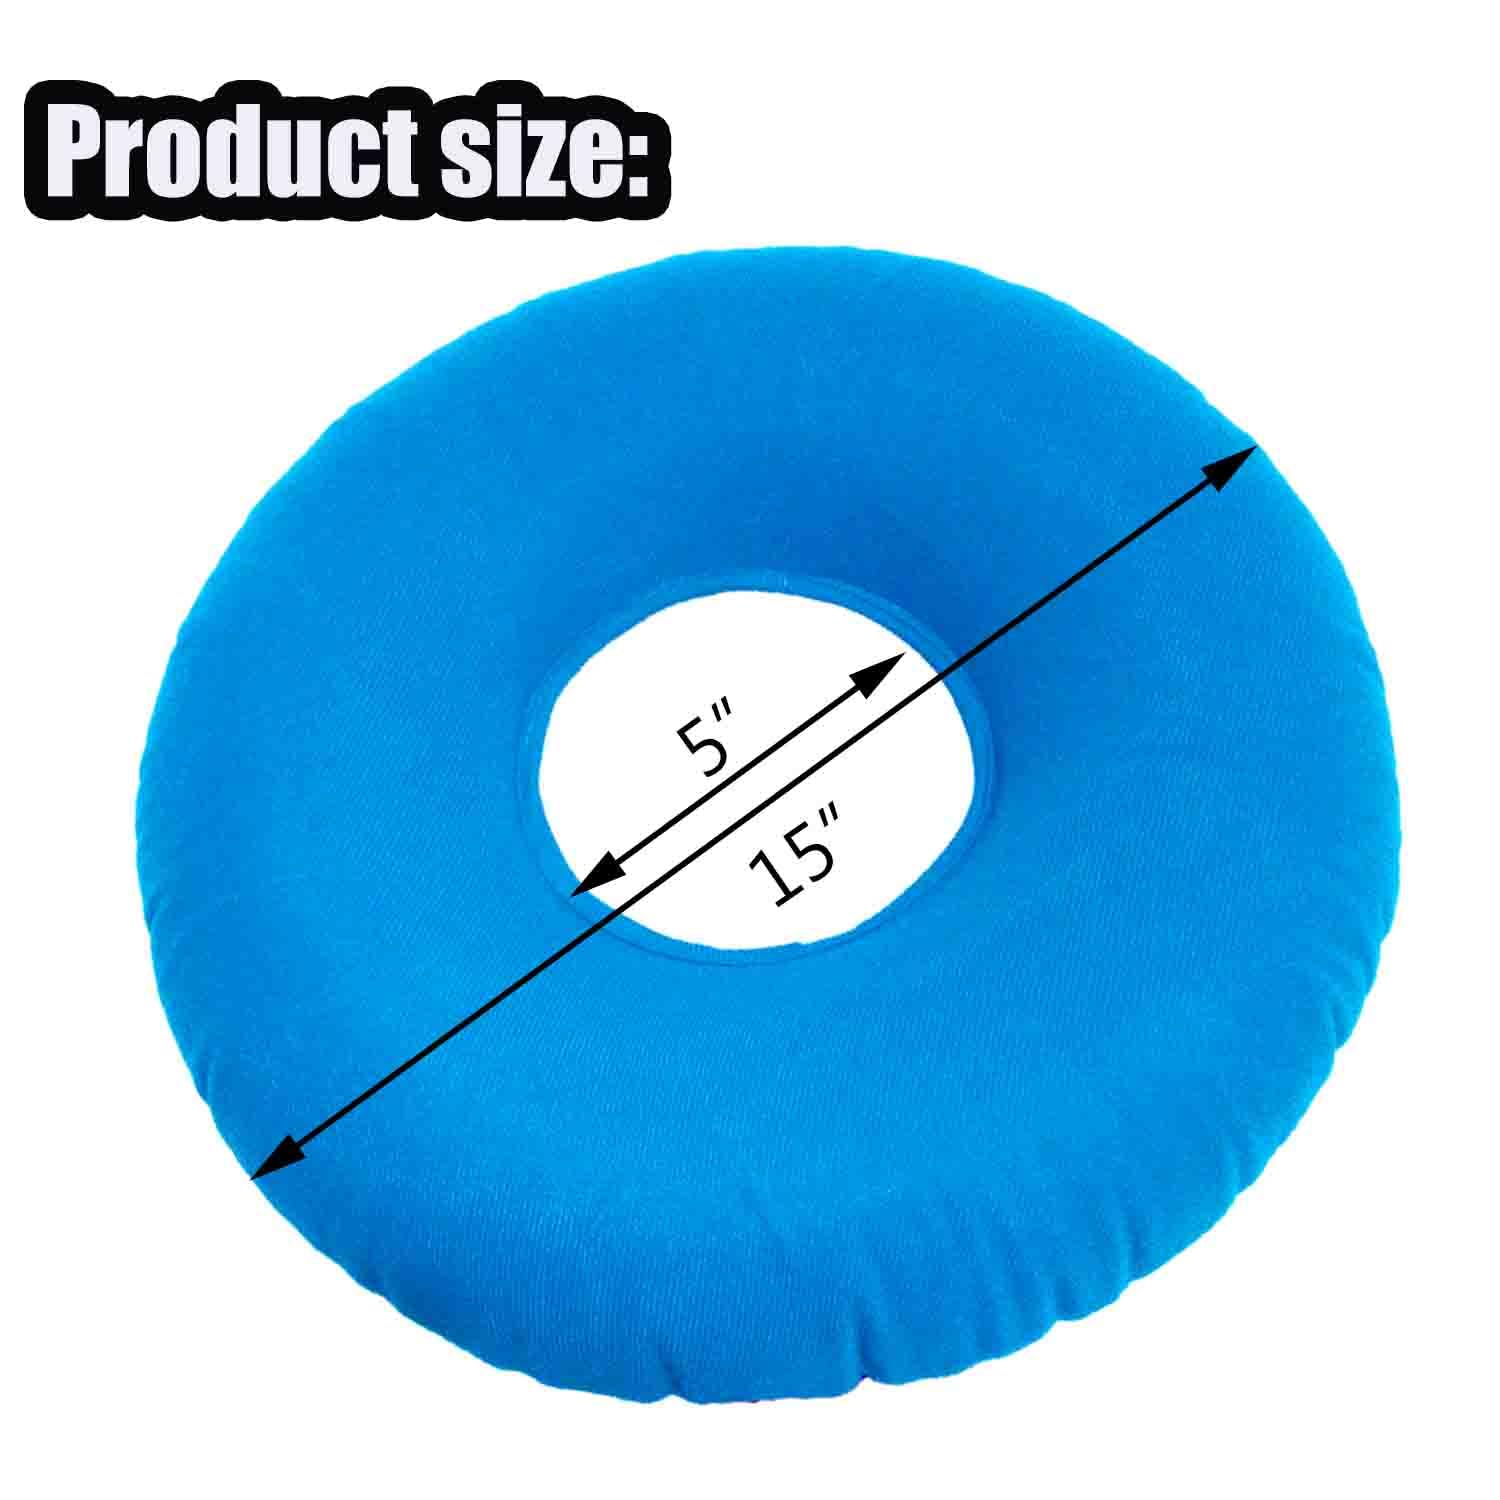 2 Pack Donut Pillow for Hemorrhoids, Inflatable Ring Donut Seat Cushion Pillow with A Pump, Hemorrhoid Seat Cushion, Round Wheelchairs Seat Cushion for Home, Car or Office Chair (15" Light Blue)